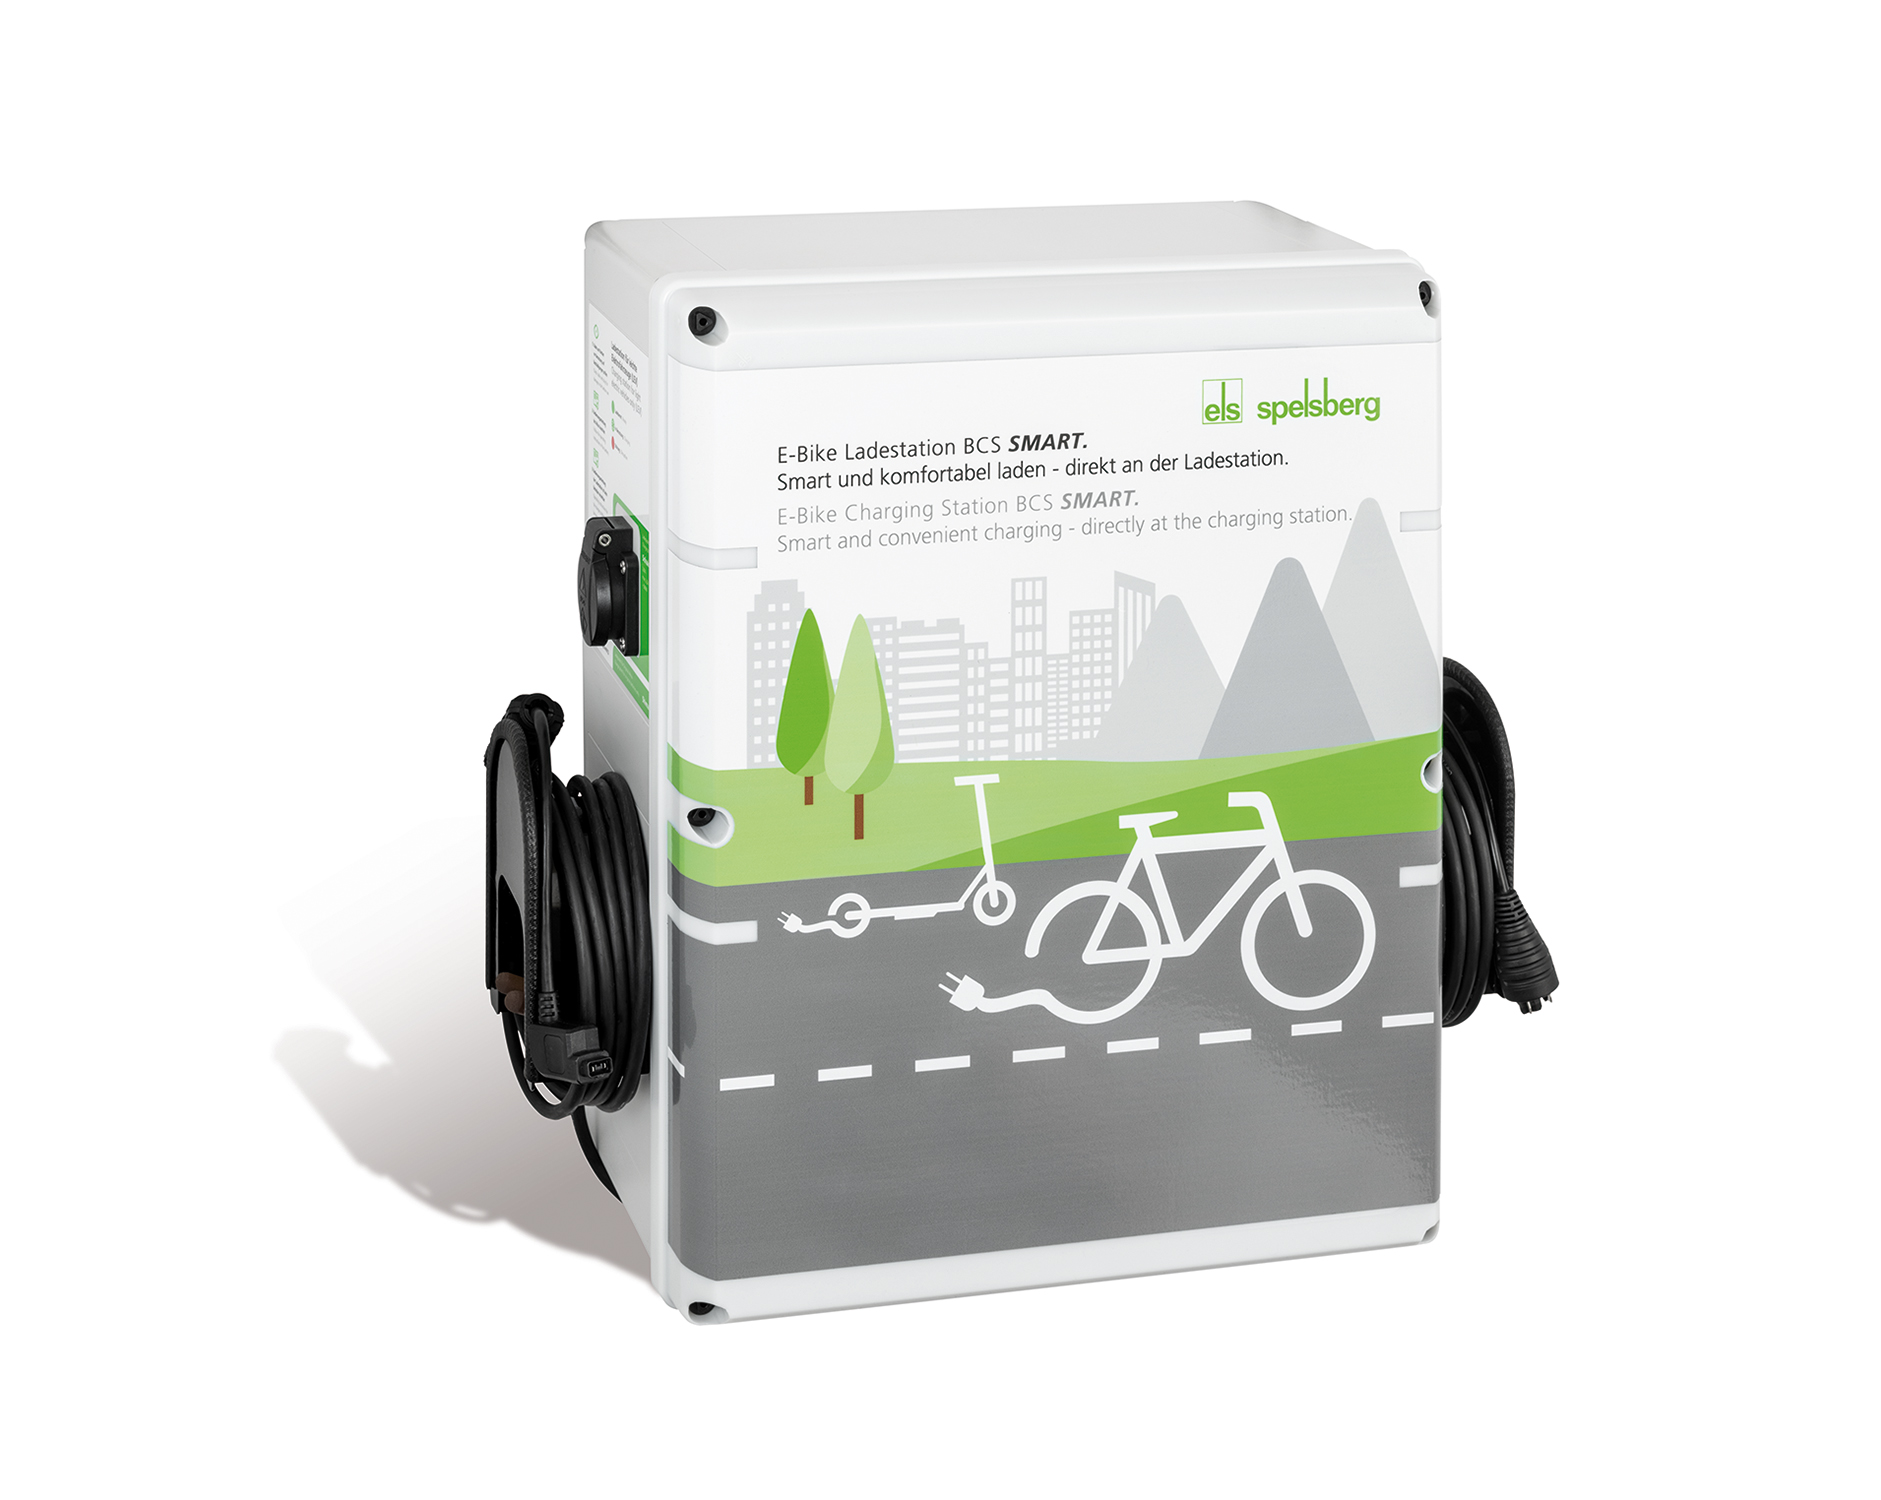 BCS Pure/Smart GB e-bike and e-scooter charging station.